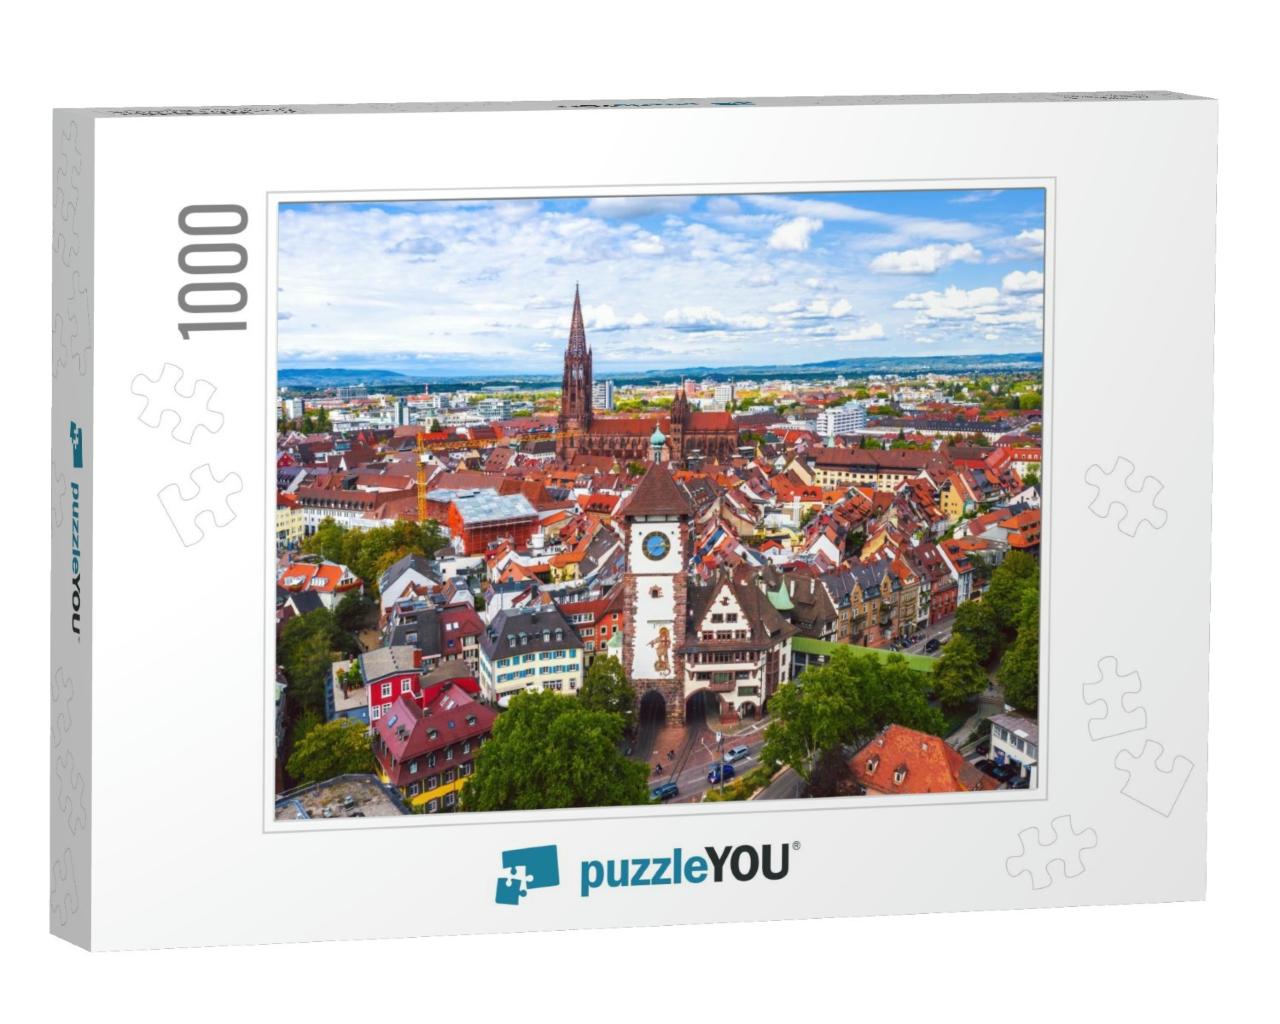 View Over Freiburg in Breisgau, Germany... Jigsaw Puzzle with 1000 pieces